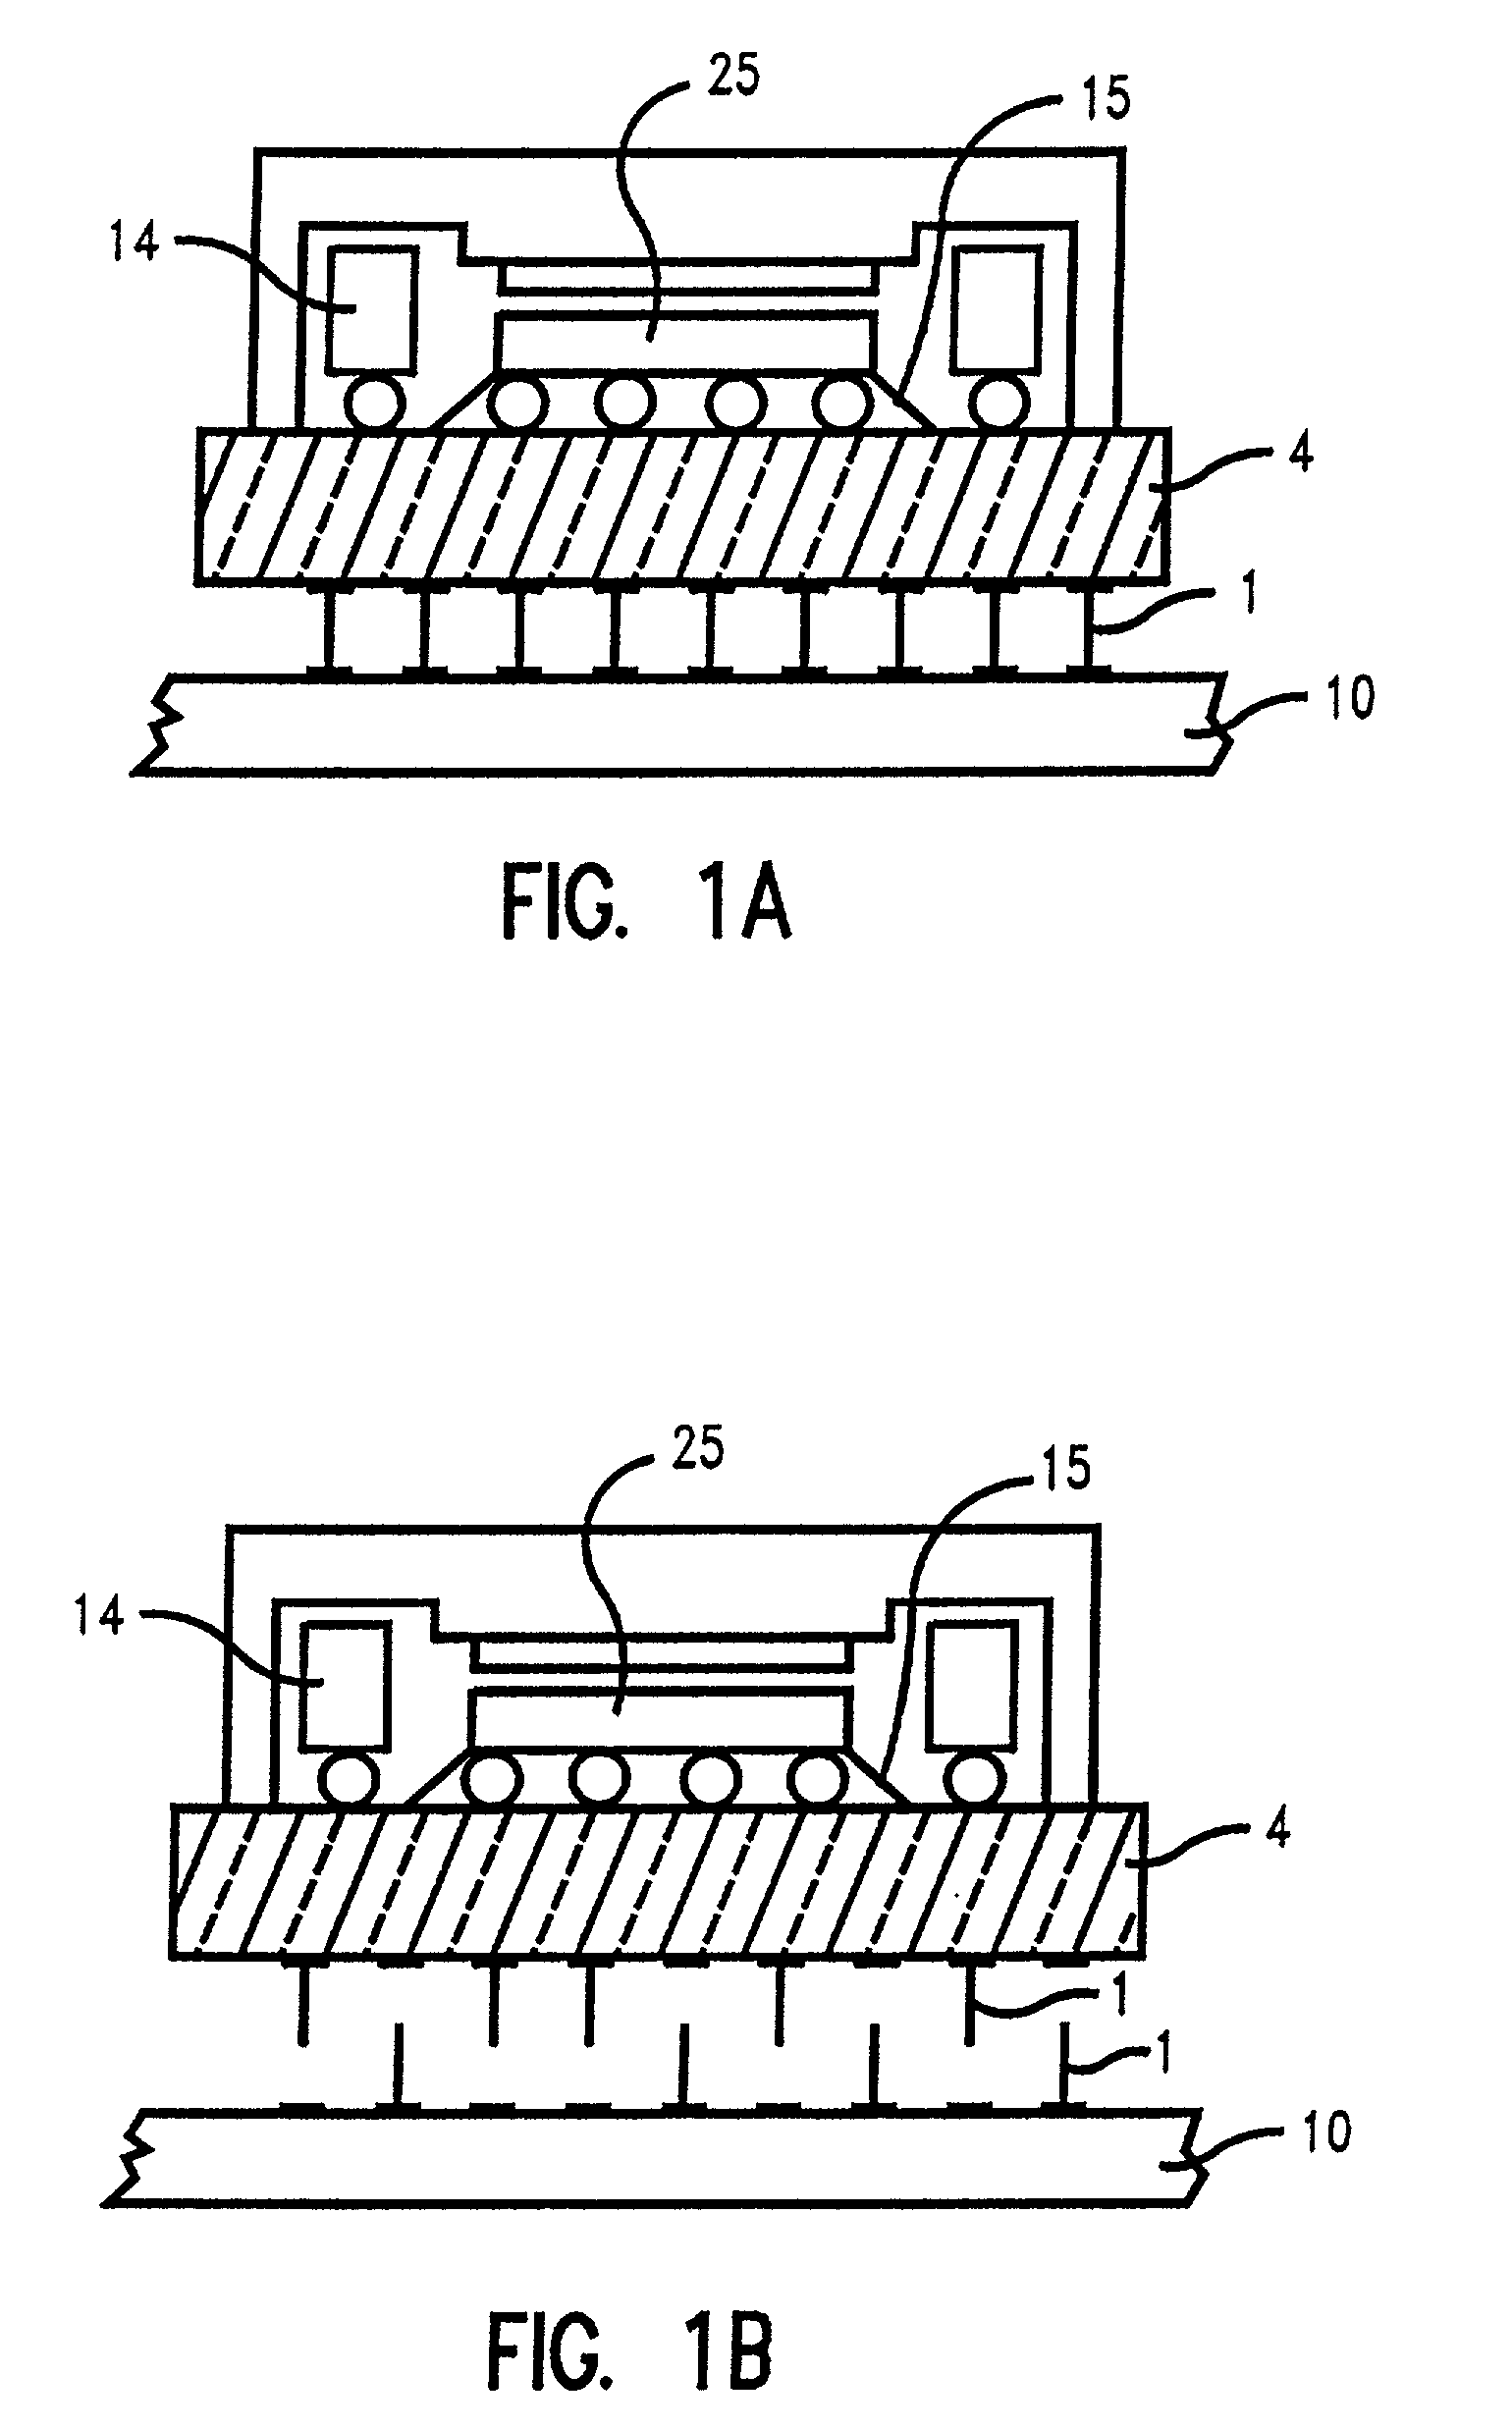 Interconnection process for module assembly and rework